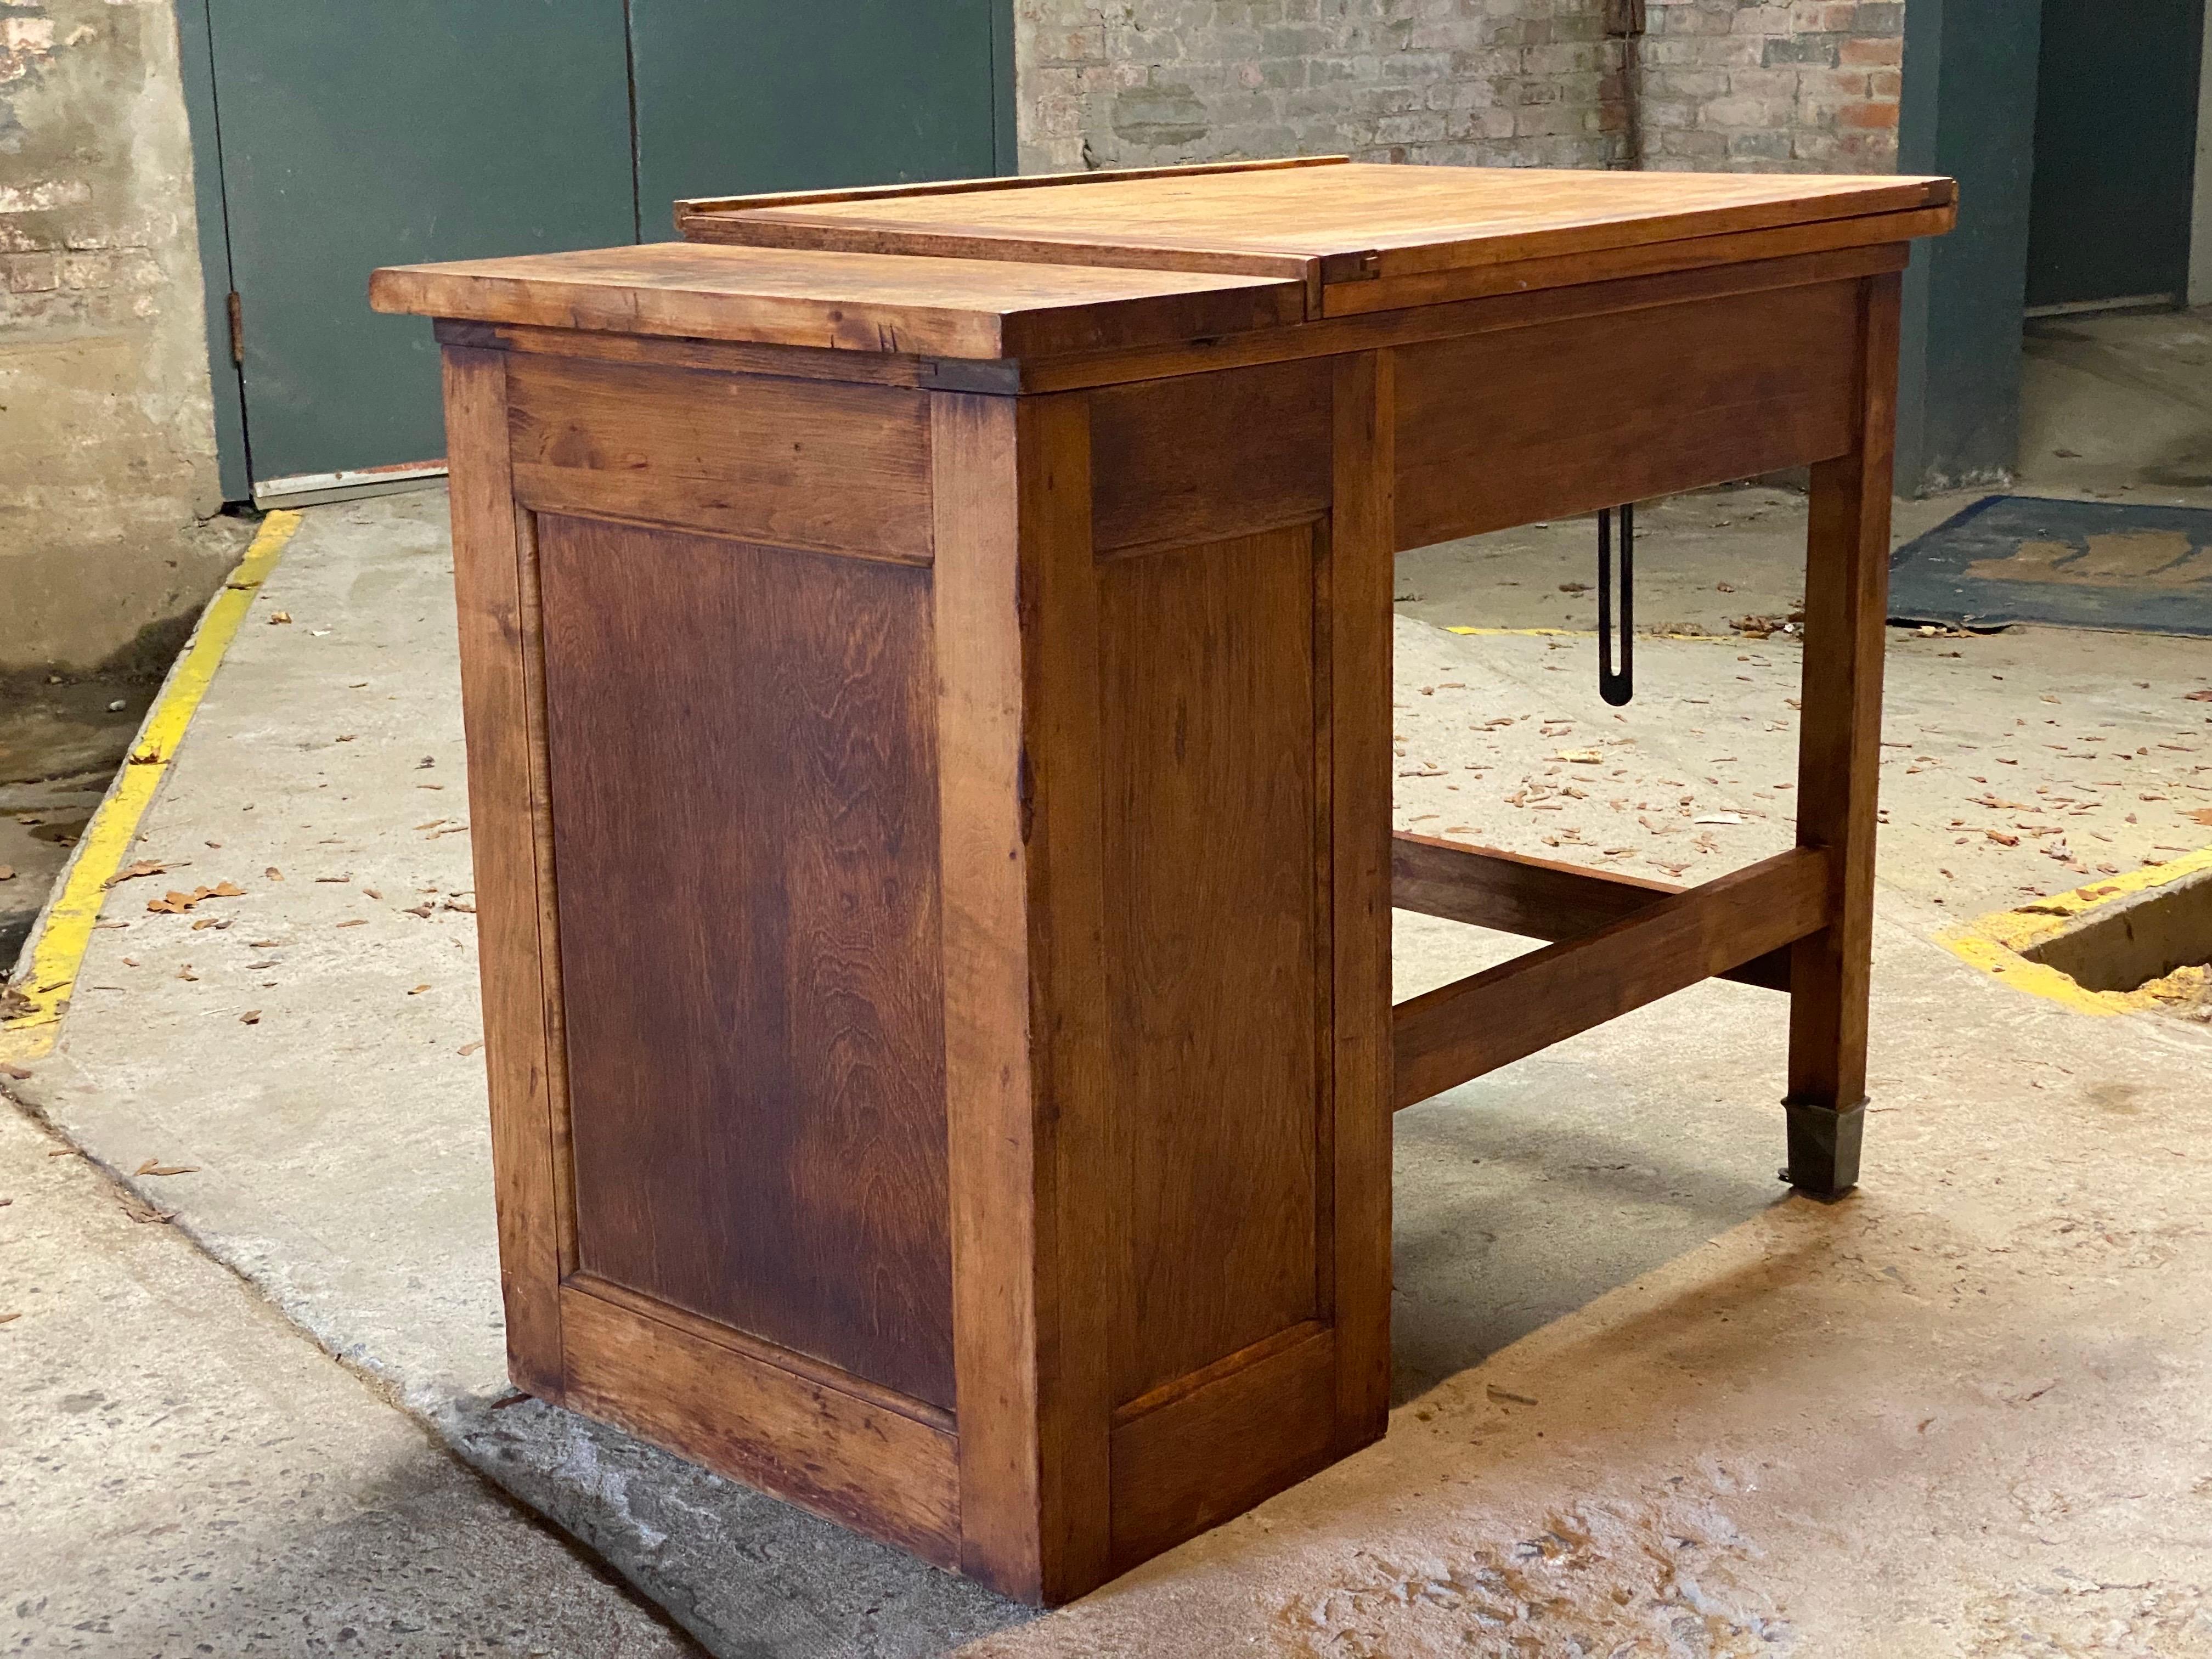 1930s Small Scale Industrial Drafting Table 2